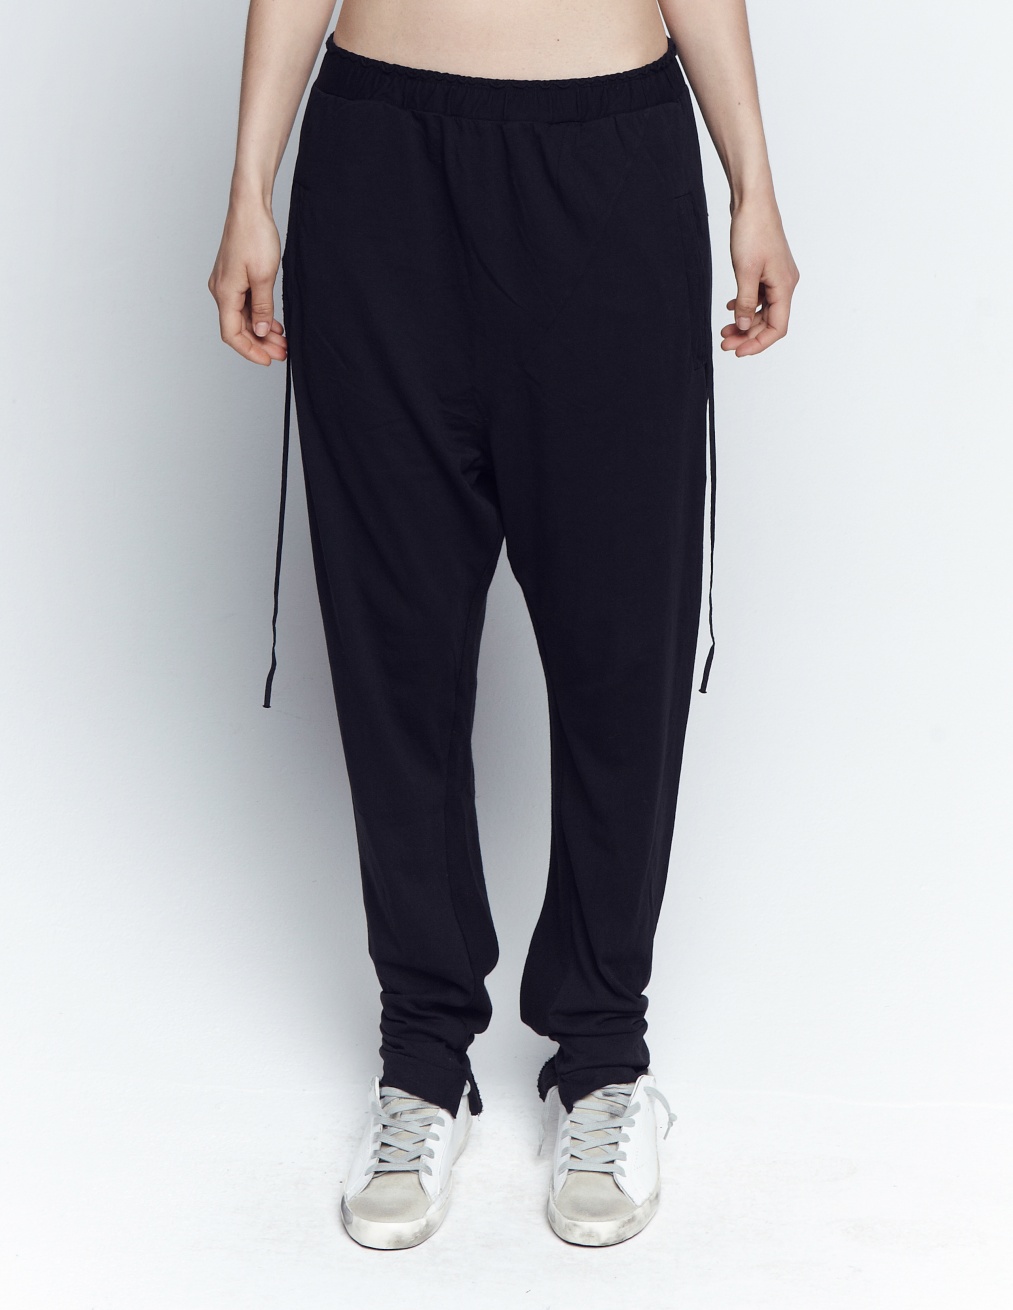 Buy Lost&Found women black drop crotch trousers for $385 online on